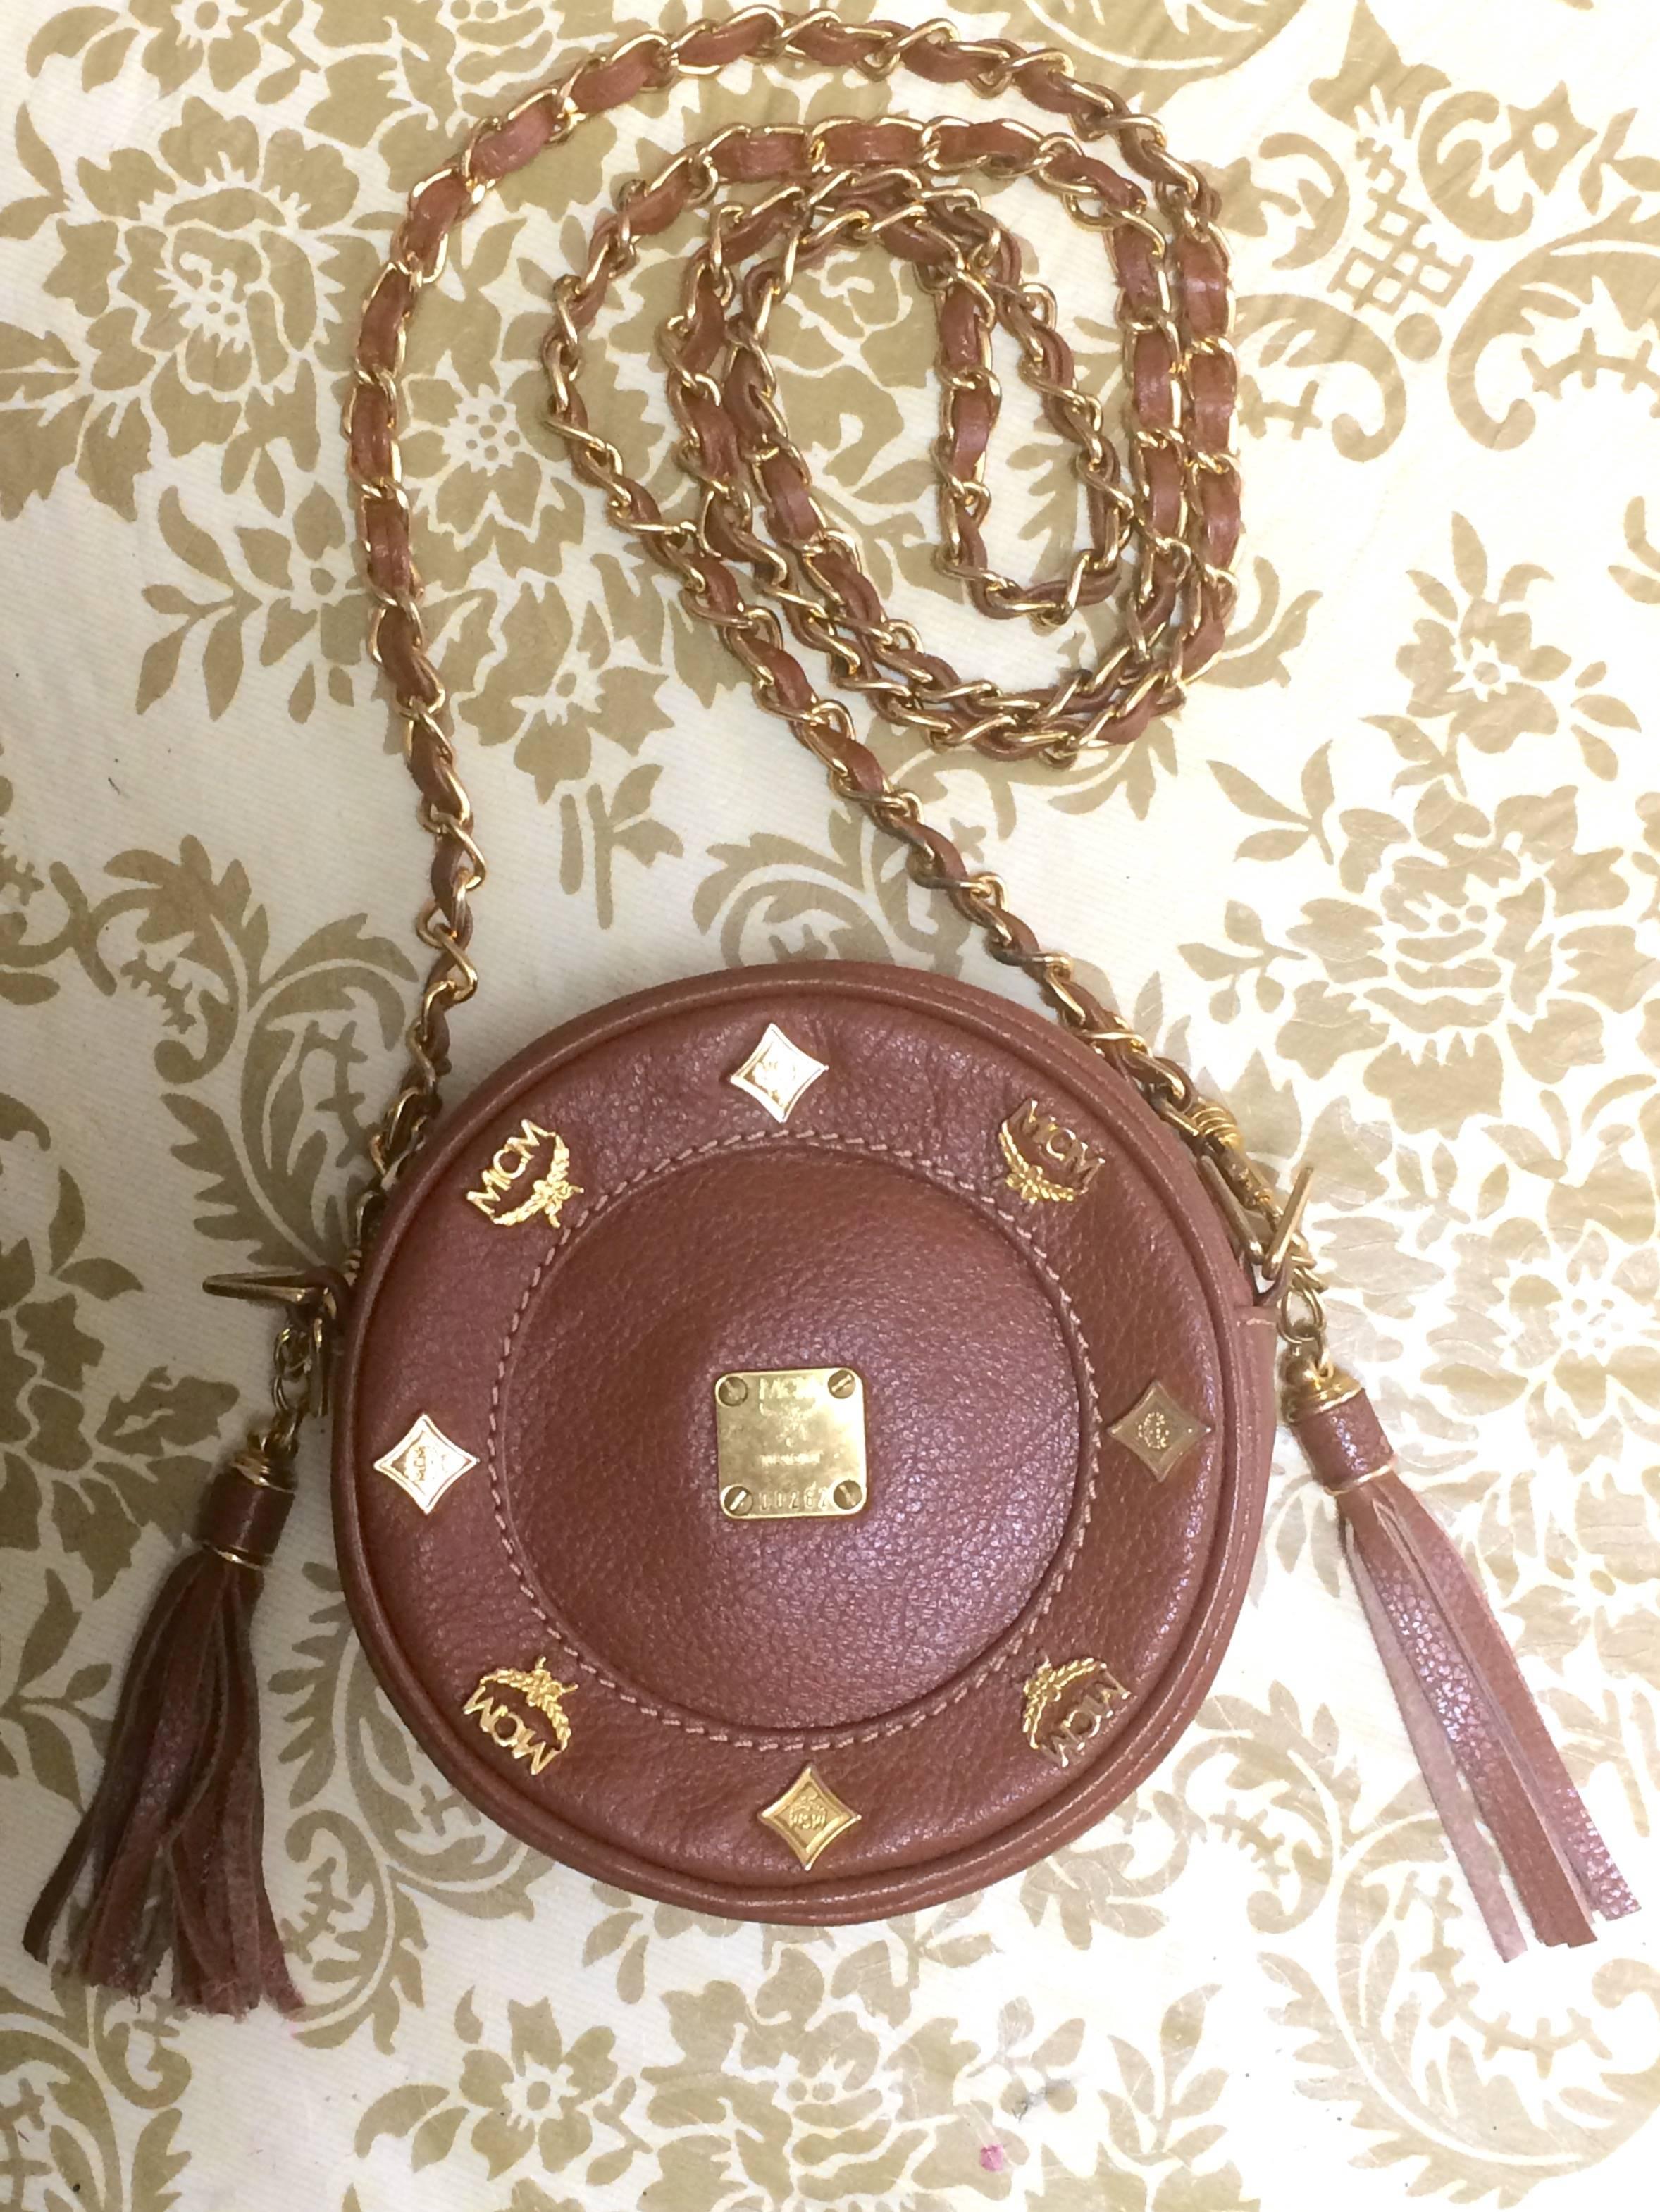 1990s. Vintage MCM brown leather round  mini Suzy Wong shoulder bag with golden logo motifs. trimmings. Designed by Michael Cromer.

MCM has been back in the fashion trend again!!
Now it's considered to be one of the must-have designer in